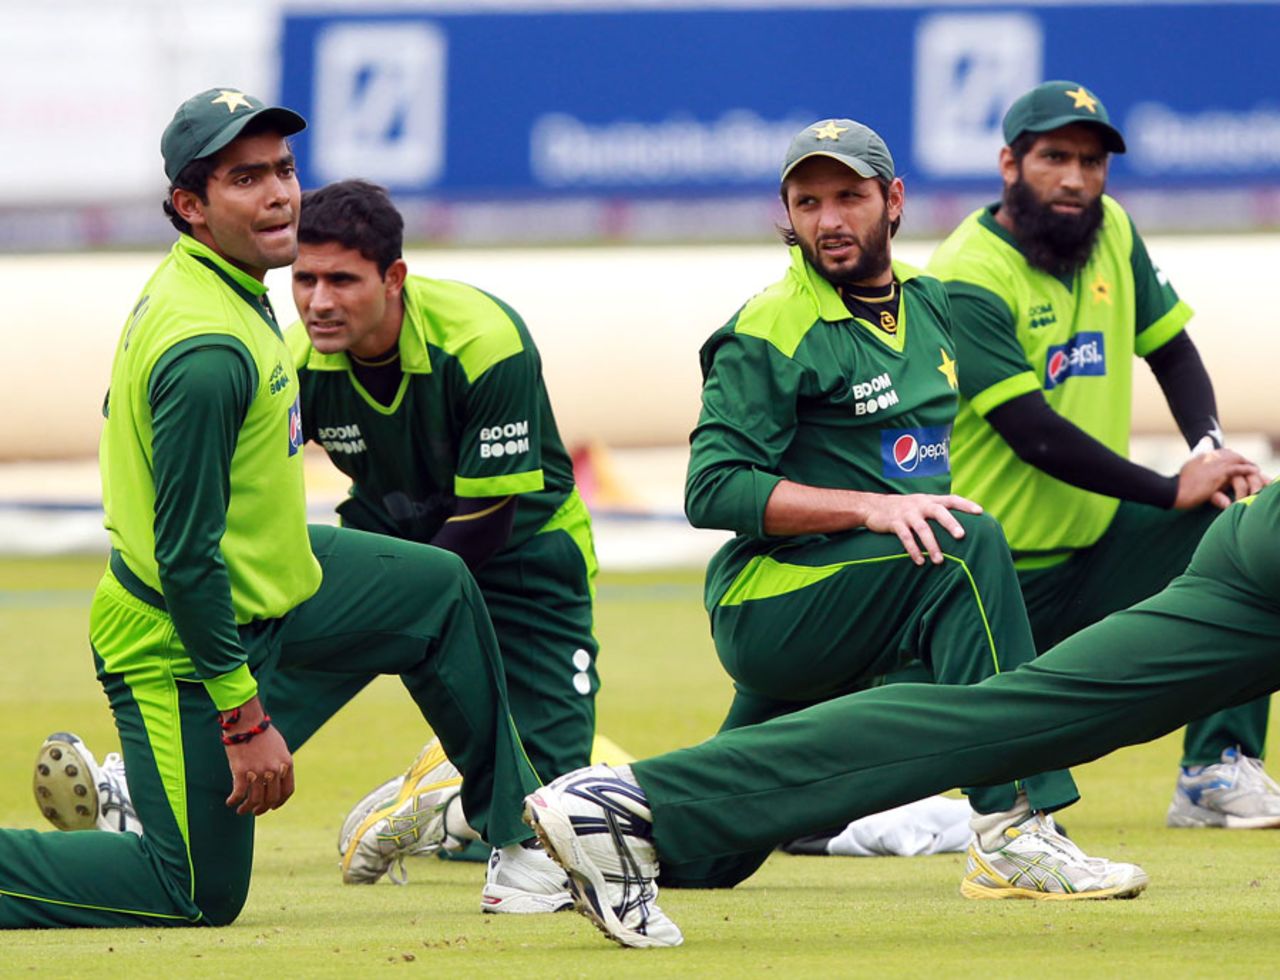 Pakistan's squad trains ahead of the fourth ODI at Lord's, September 19 2010